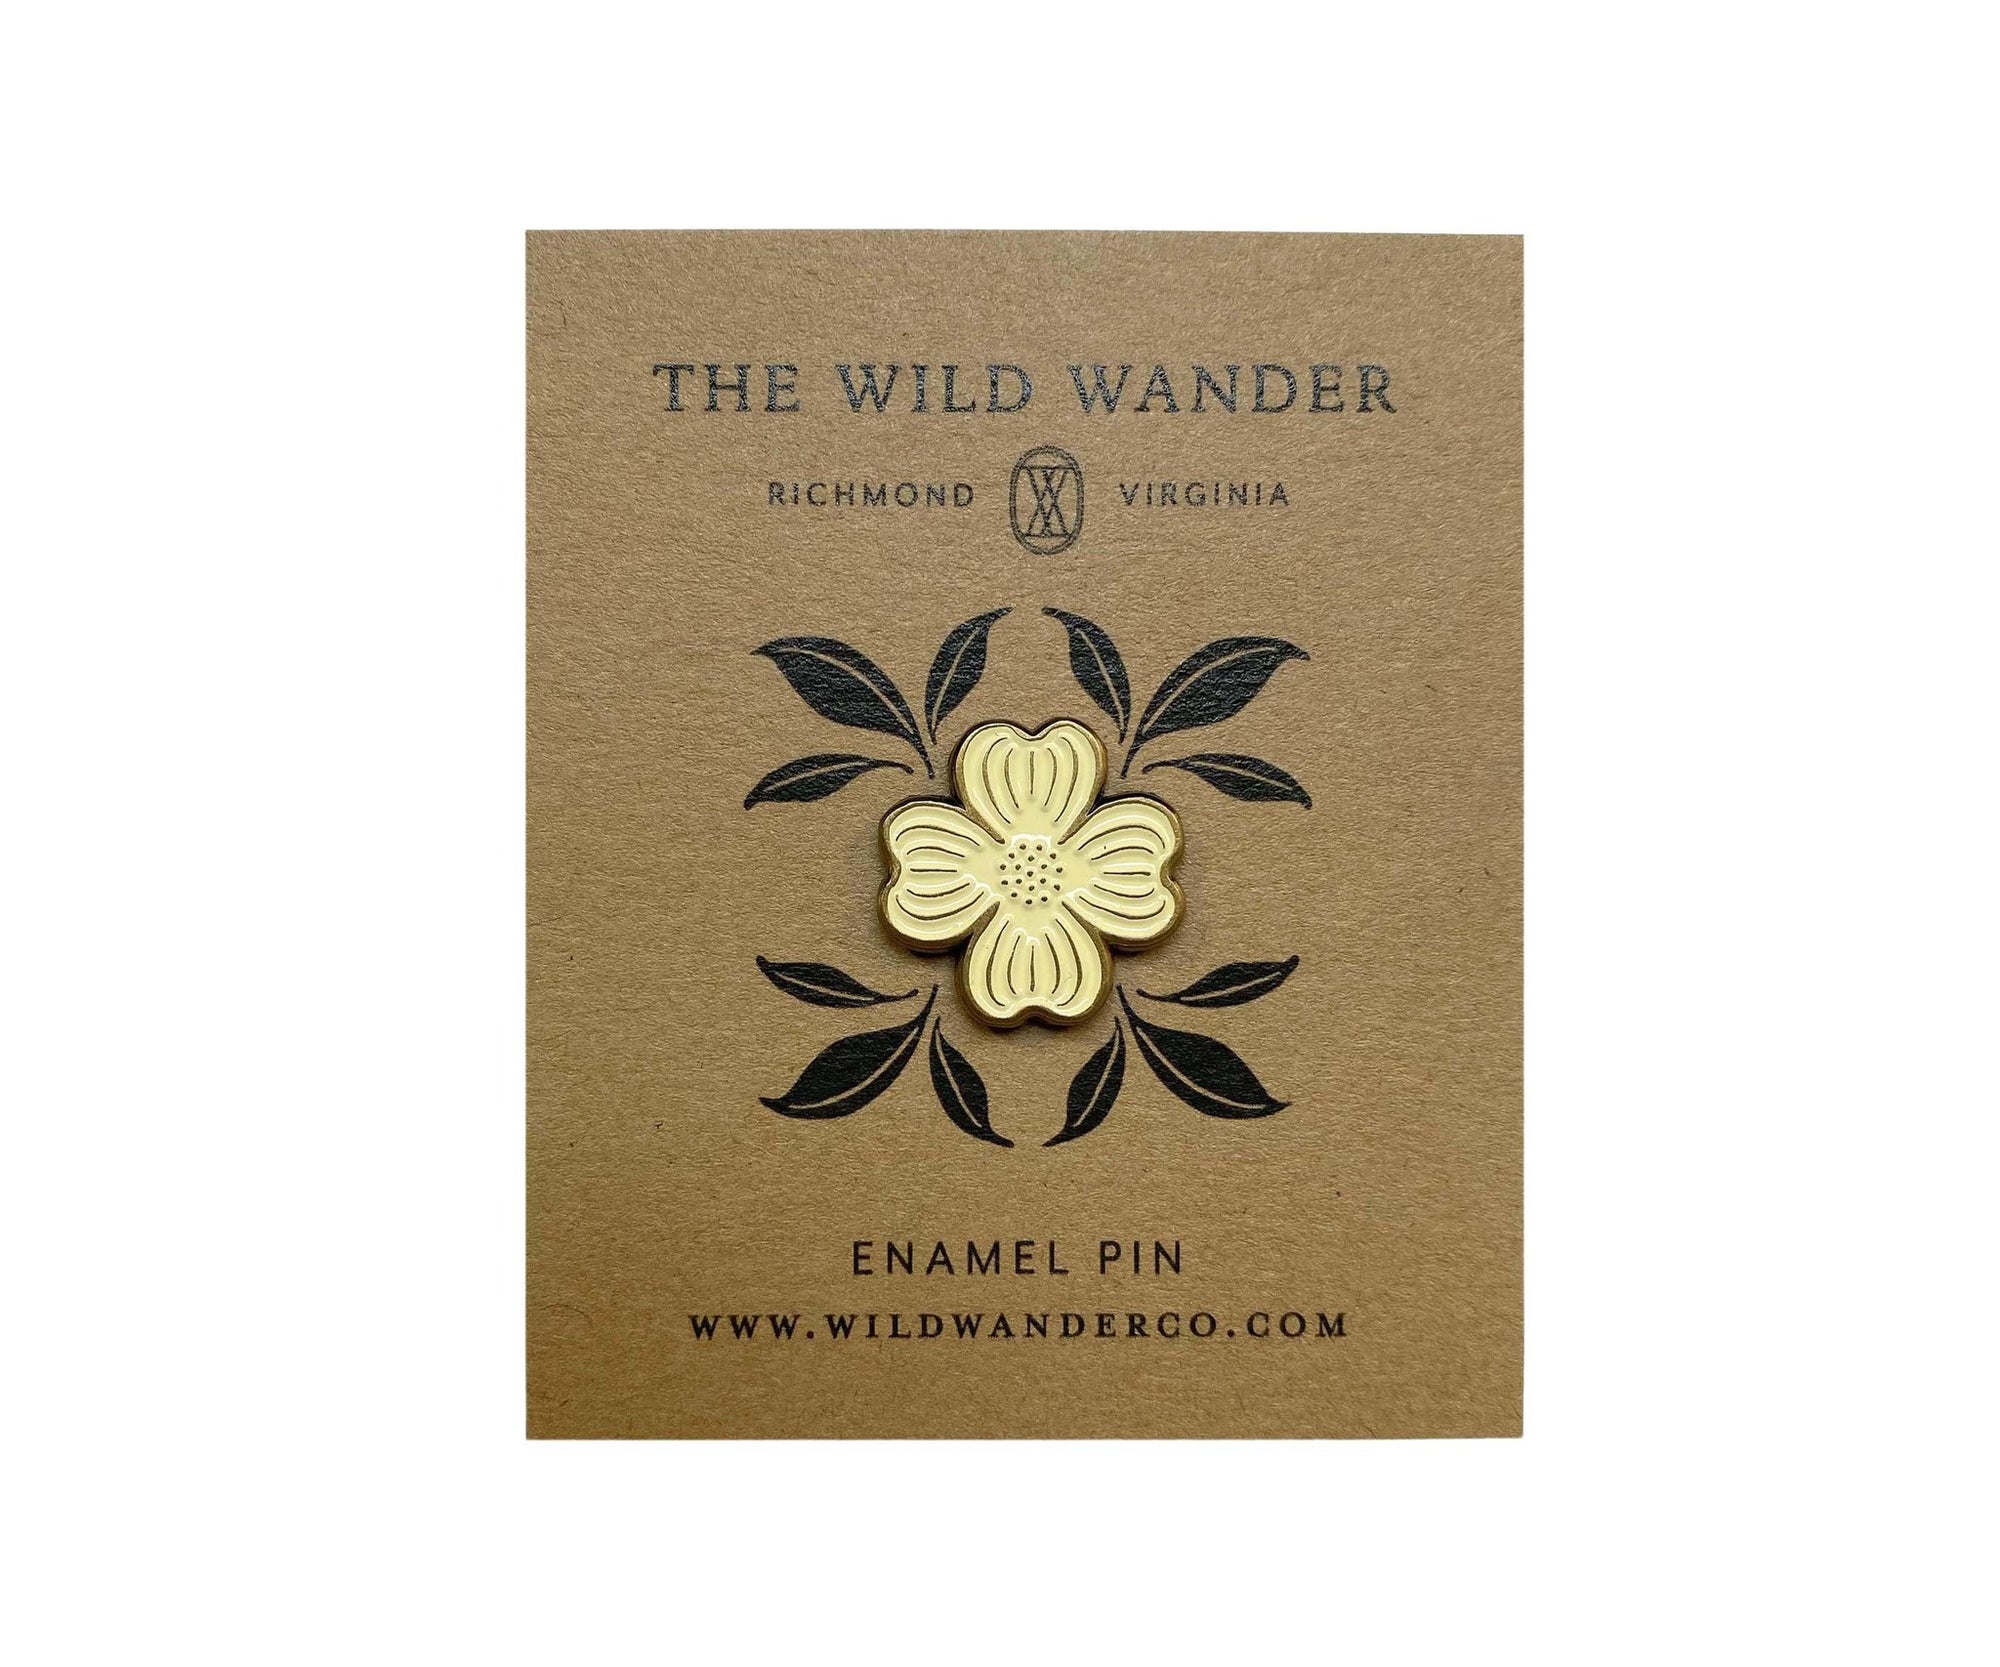 The Dogwood Enamel Pin by The Wild Wander.